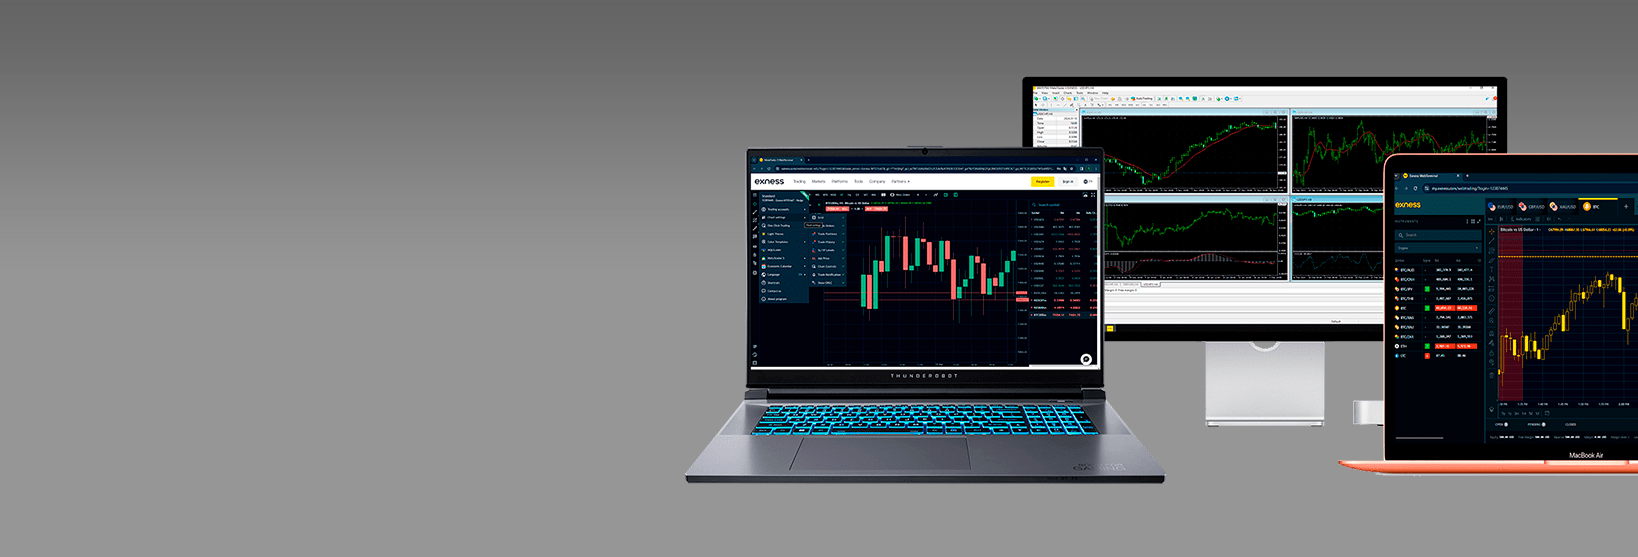 Image - Exness Demo version: open a demo account Exness and start trading